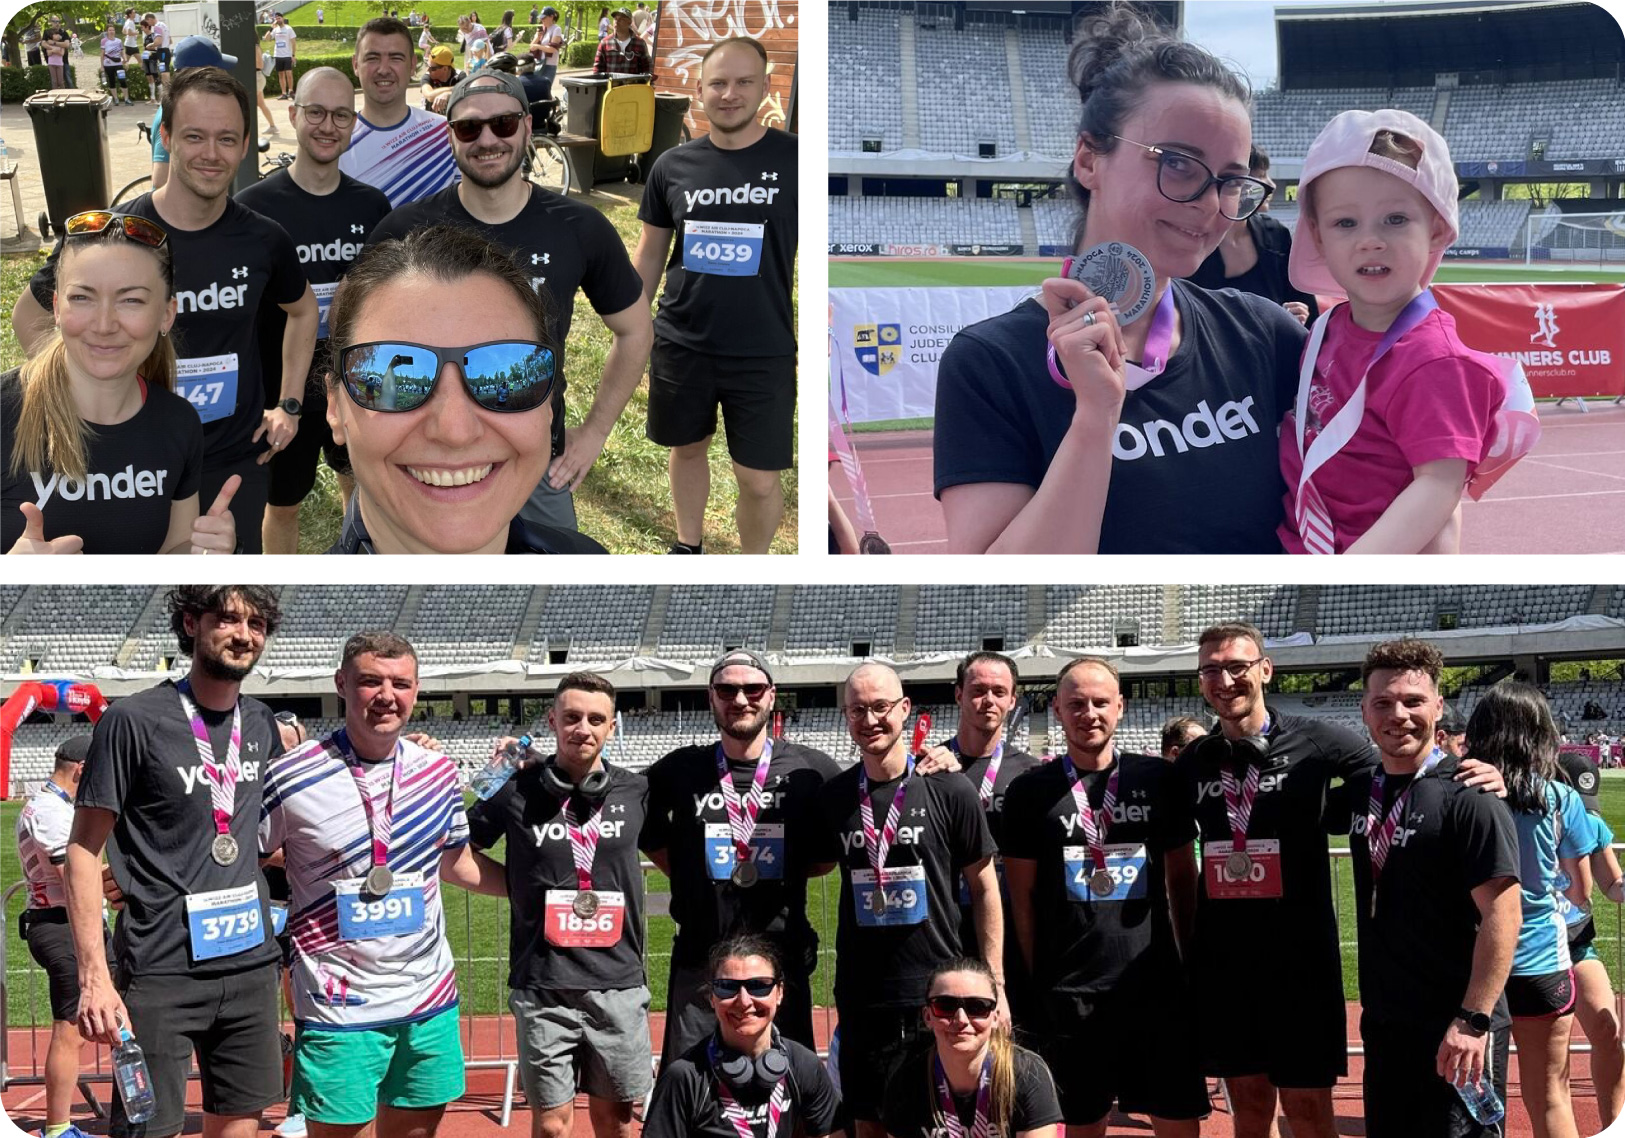 Photo collage of Yonder employees participating in a run to support vulnerable children in their local communities.